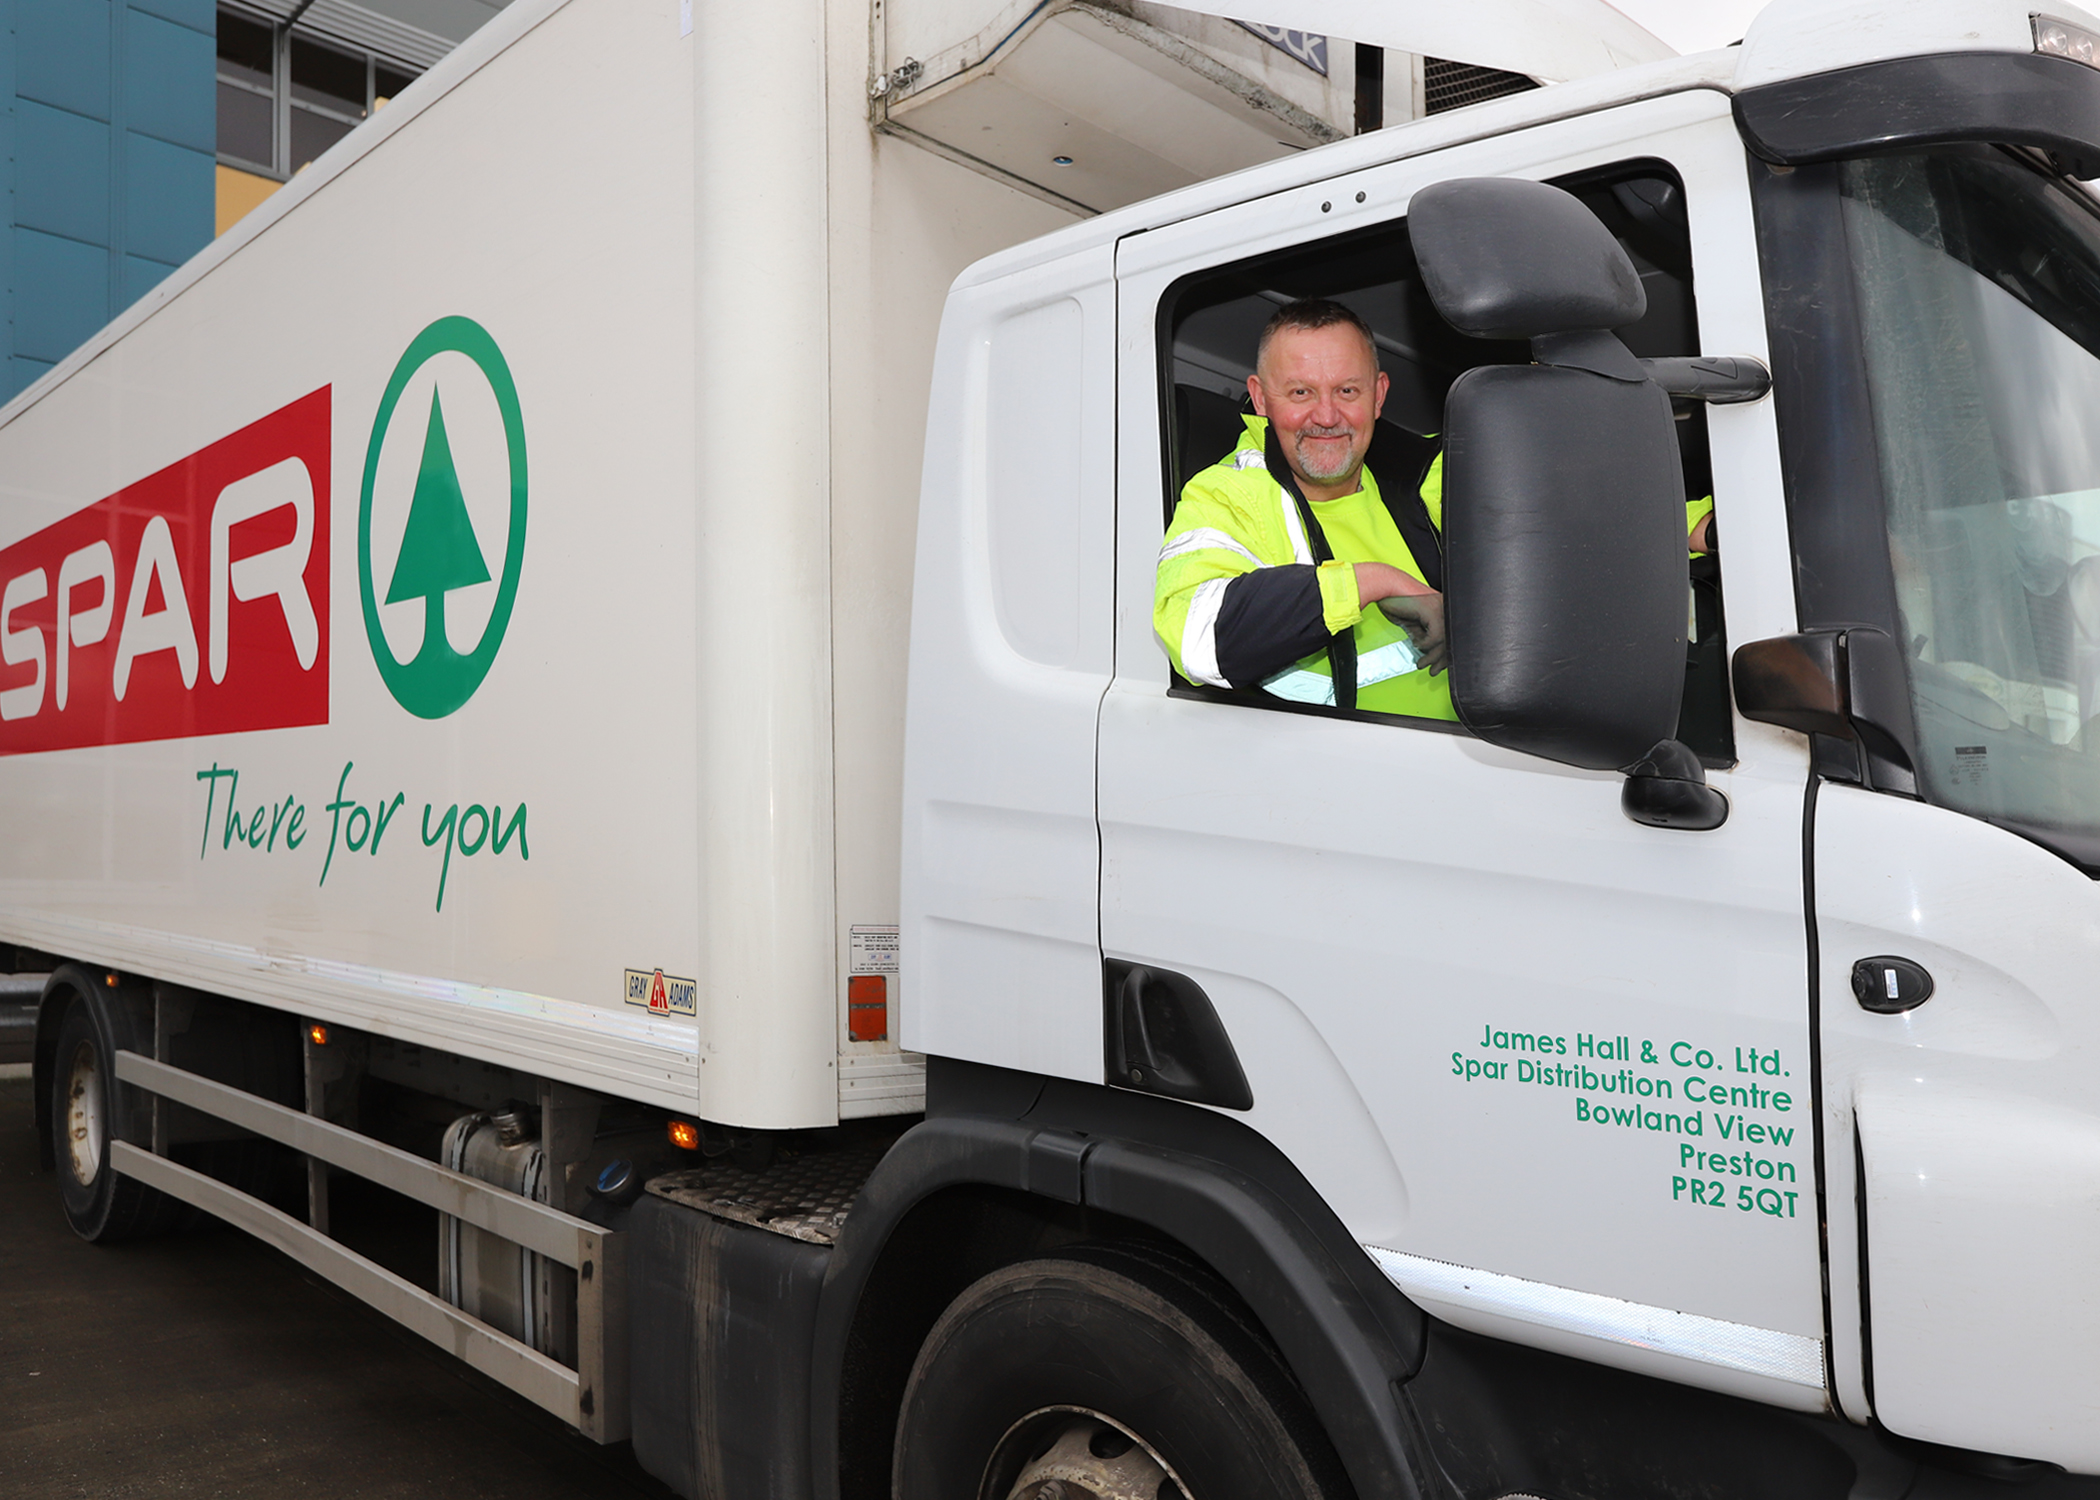 James Hall & Co. Ltd HGV driver set to take on peers in SPAR International competition